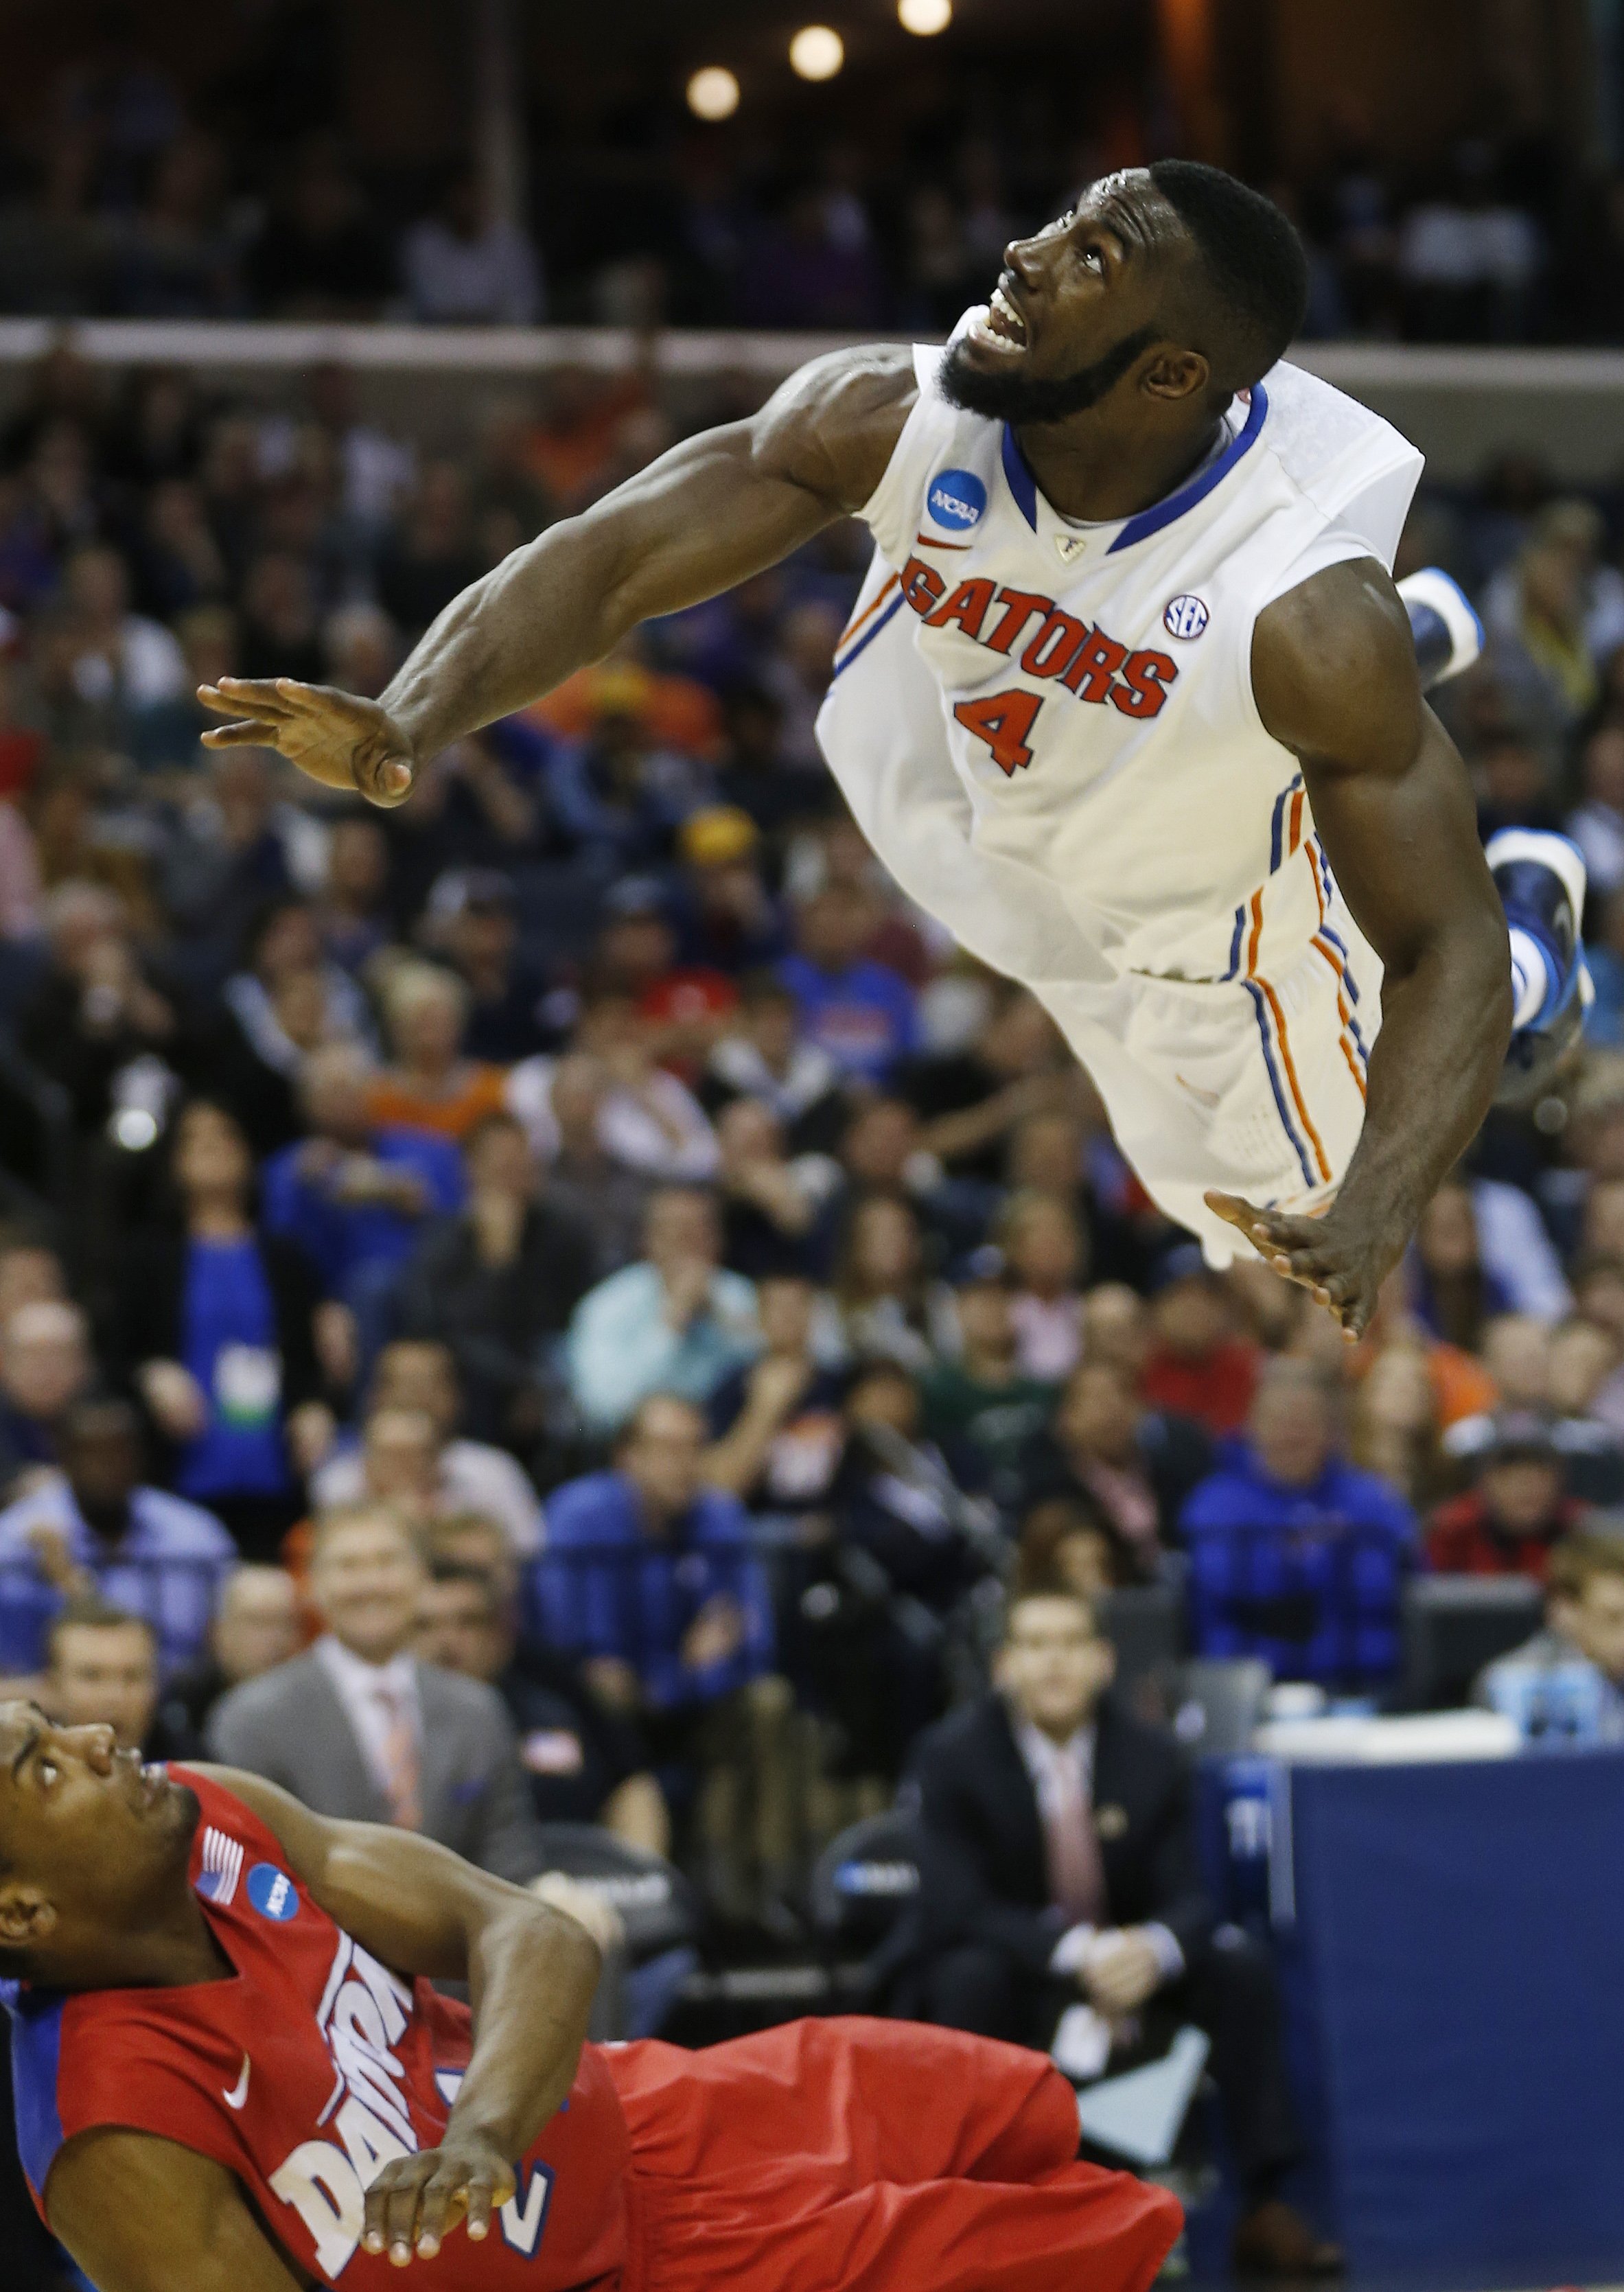 Florida center Patric Young watches his shot as Dayton forward Dyshawn Pierre falls to the floor during the second half in a regional final game at the NCAA college basketball tournament, March 29, 2014, in Memphis, Tenn.